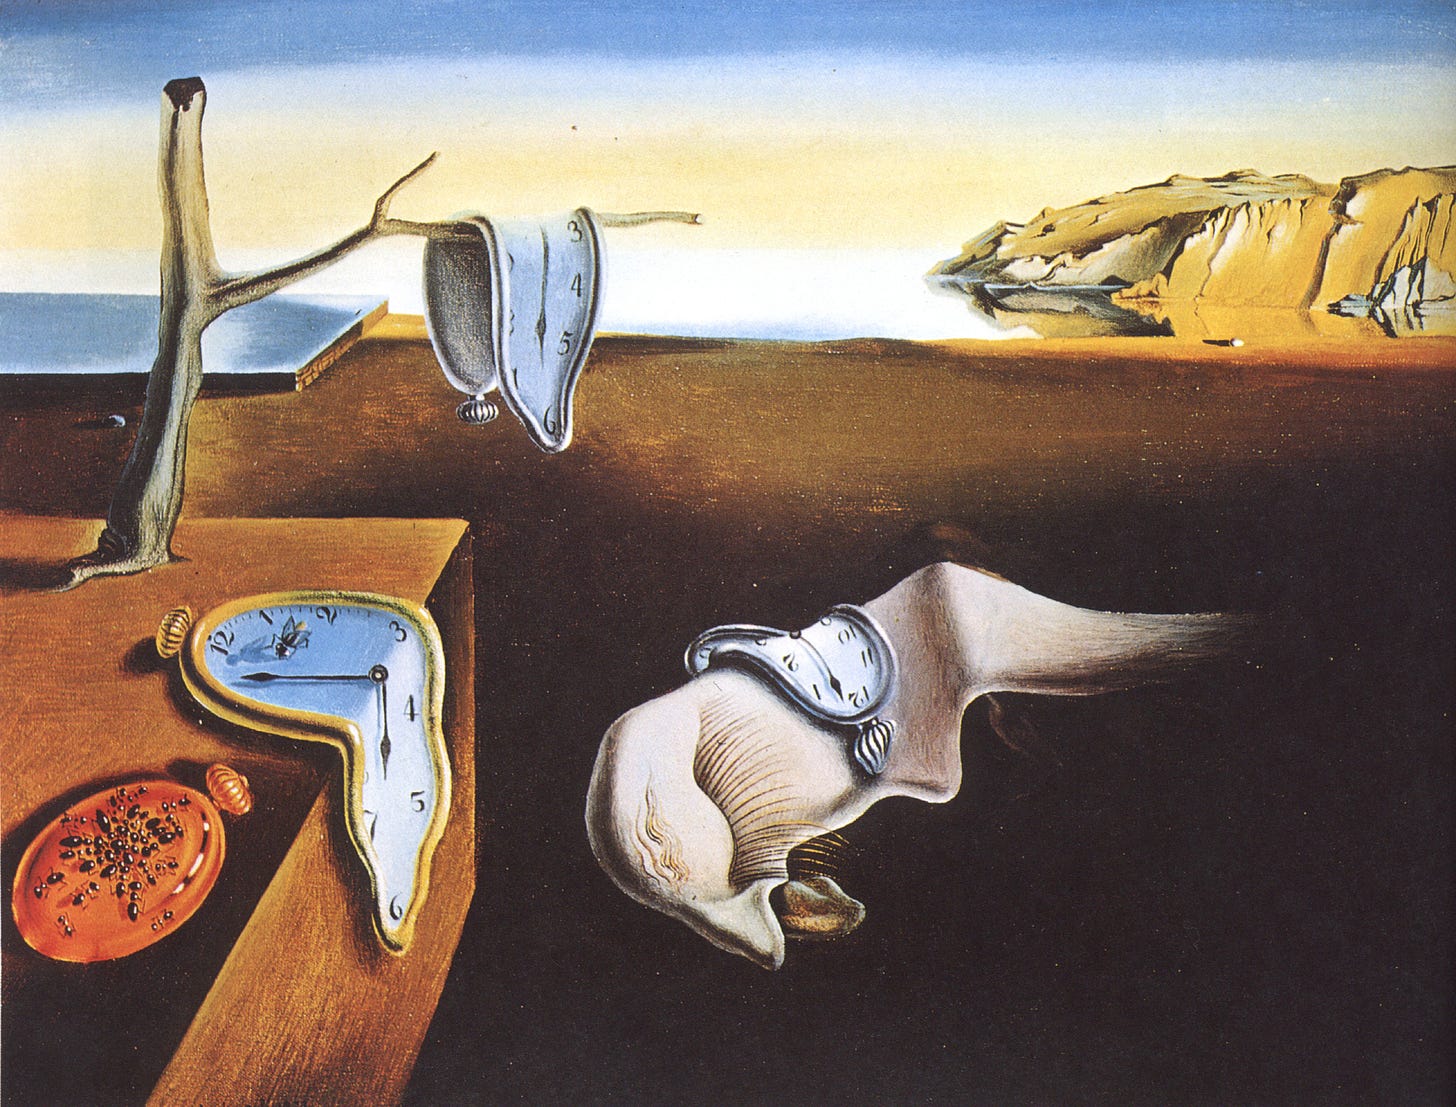 The Persistence of Memory and Salvador Dalí's Contribution to Surrealism